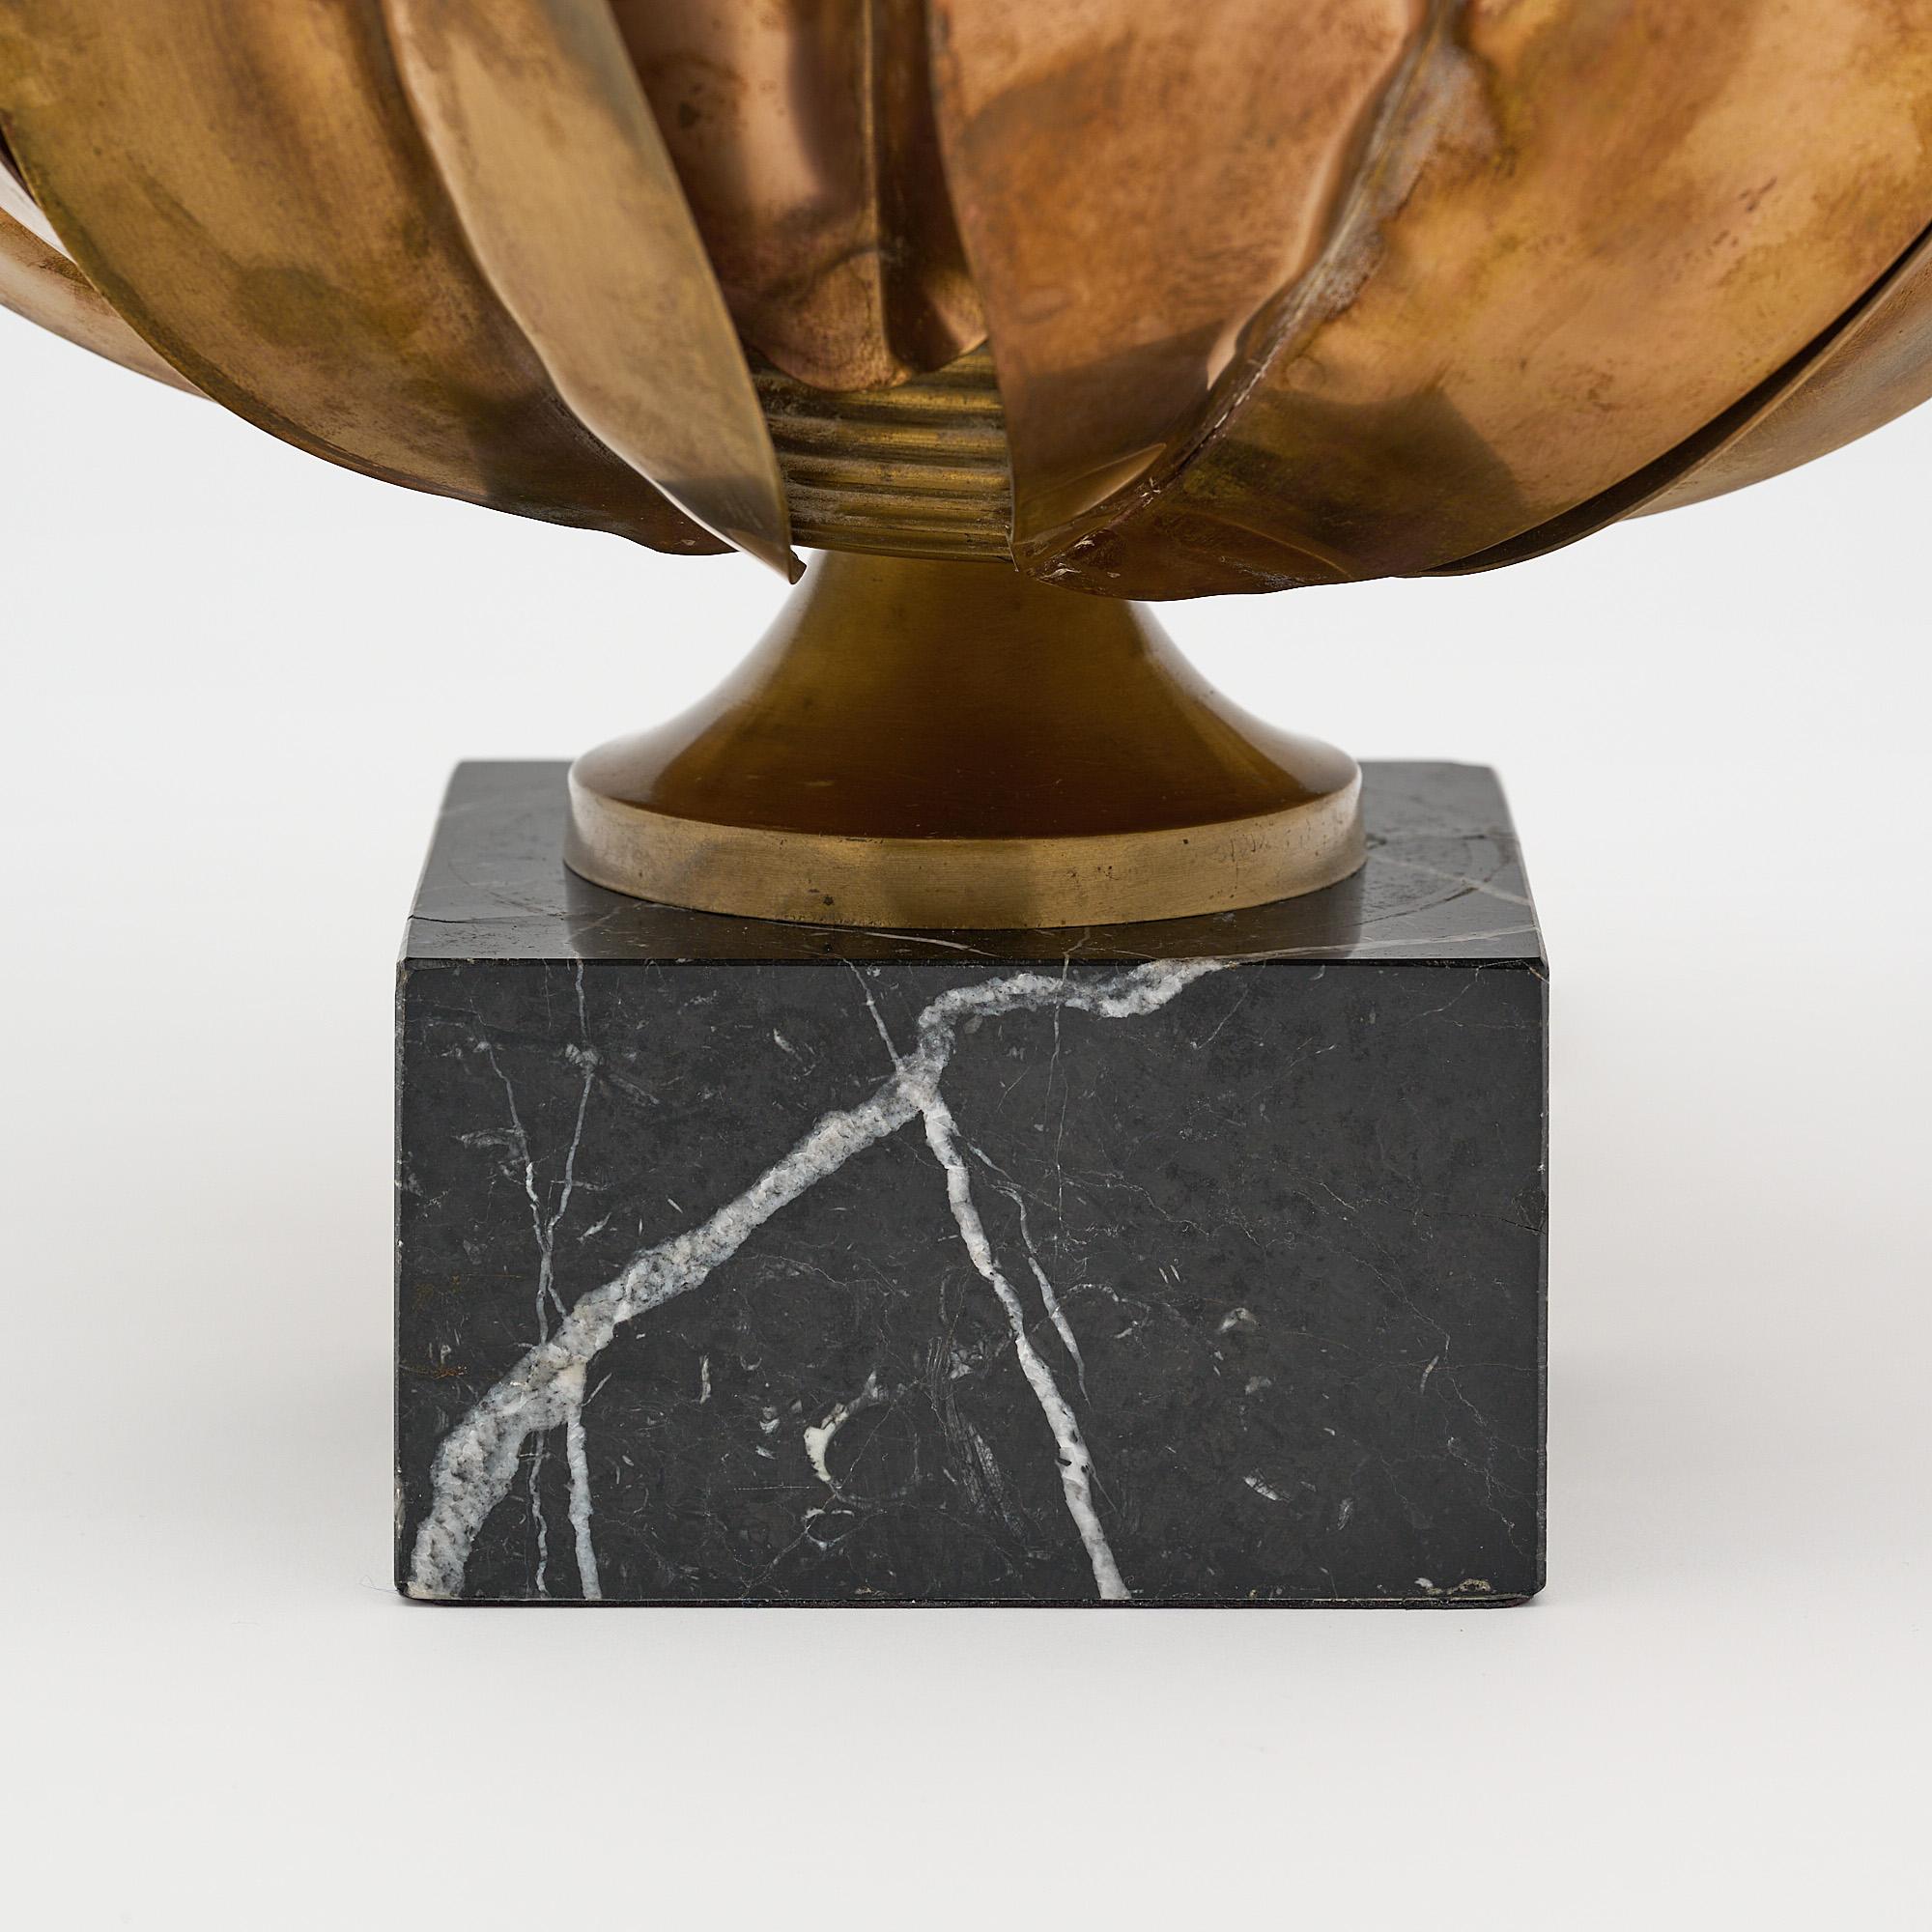 Lamp, French, in the modernist style by Maison Charles. The lamp features an array of hand embossed brass leaves flaring out “En Corolle” with a black veined marble base. Rewired to US standards.